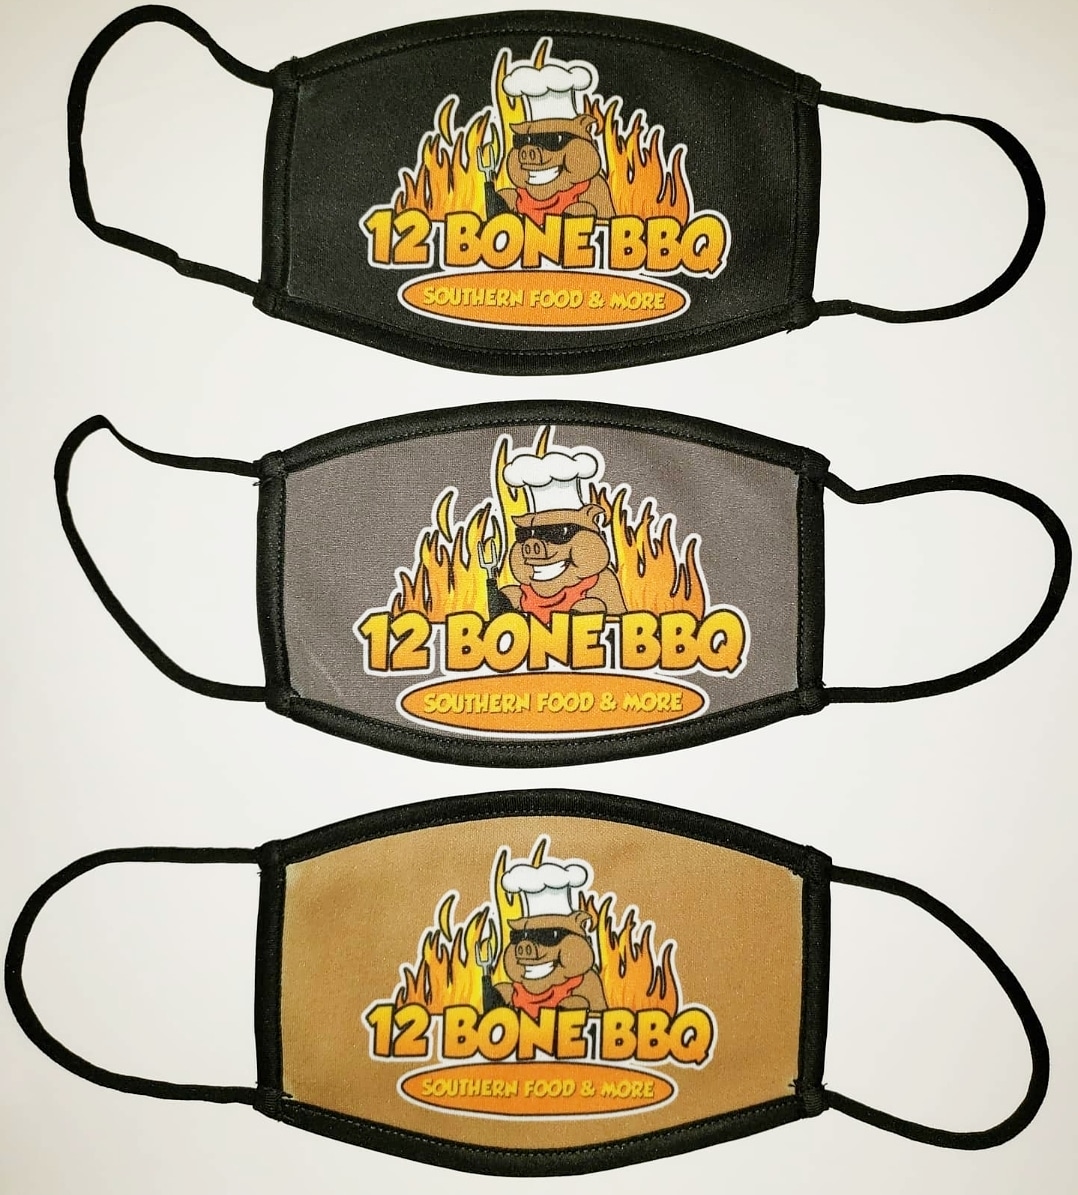 PERSONALIZED MASK FOR 12 BONE BBQ! 